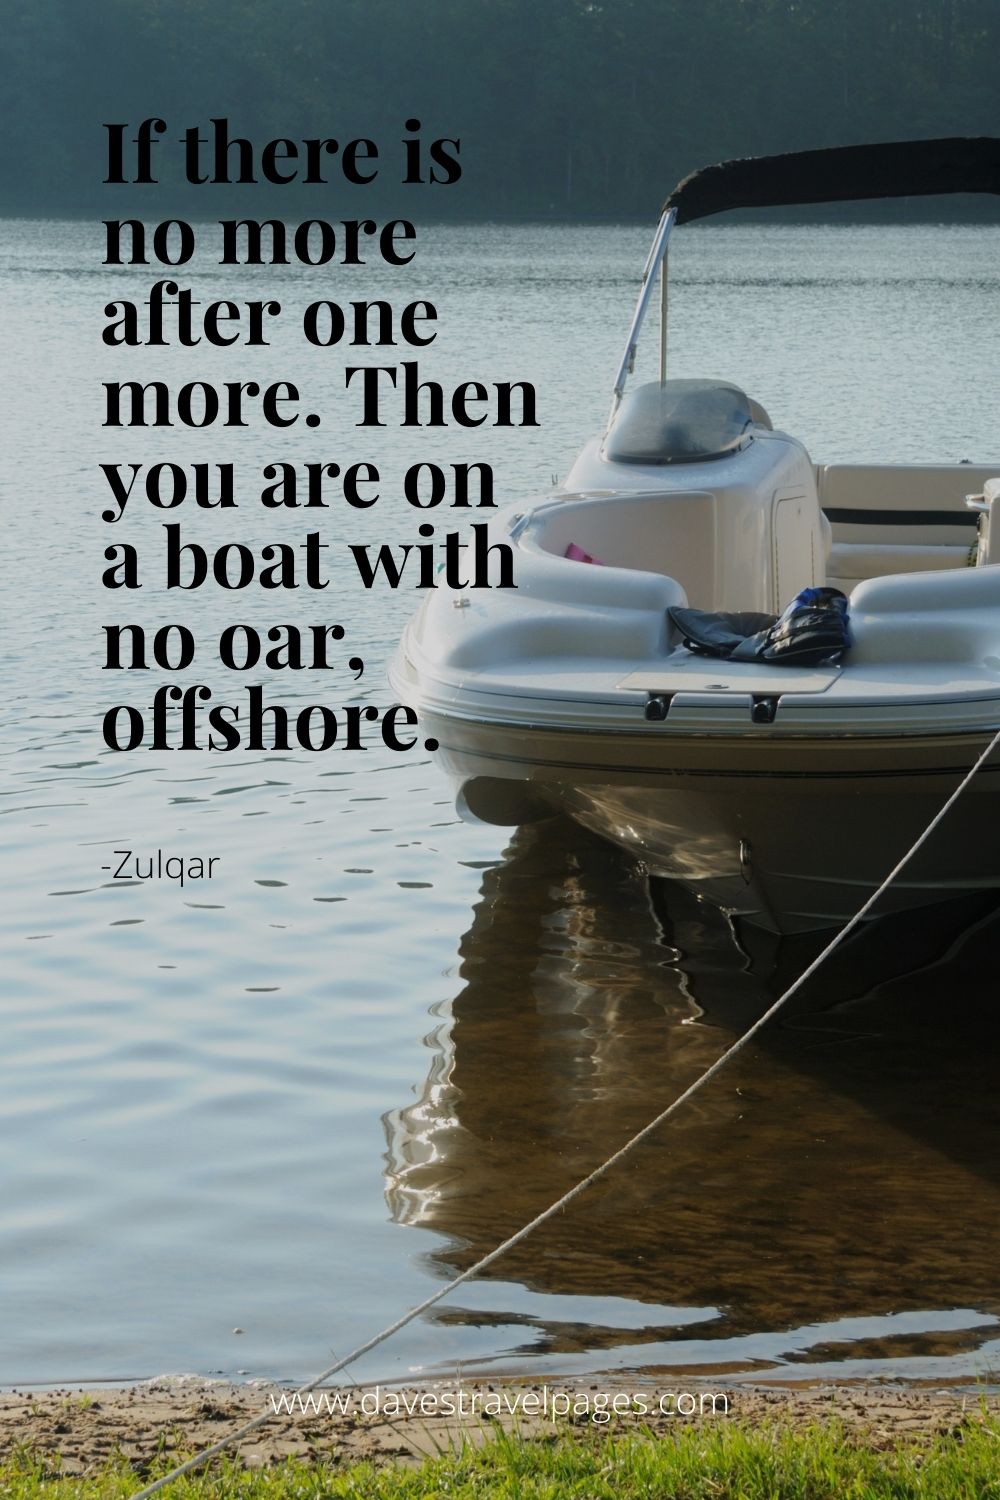 Quotes about Boats and Sailing